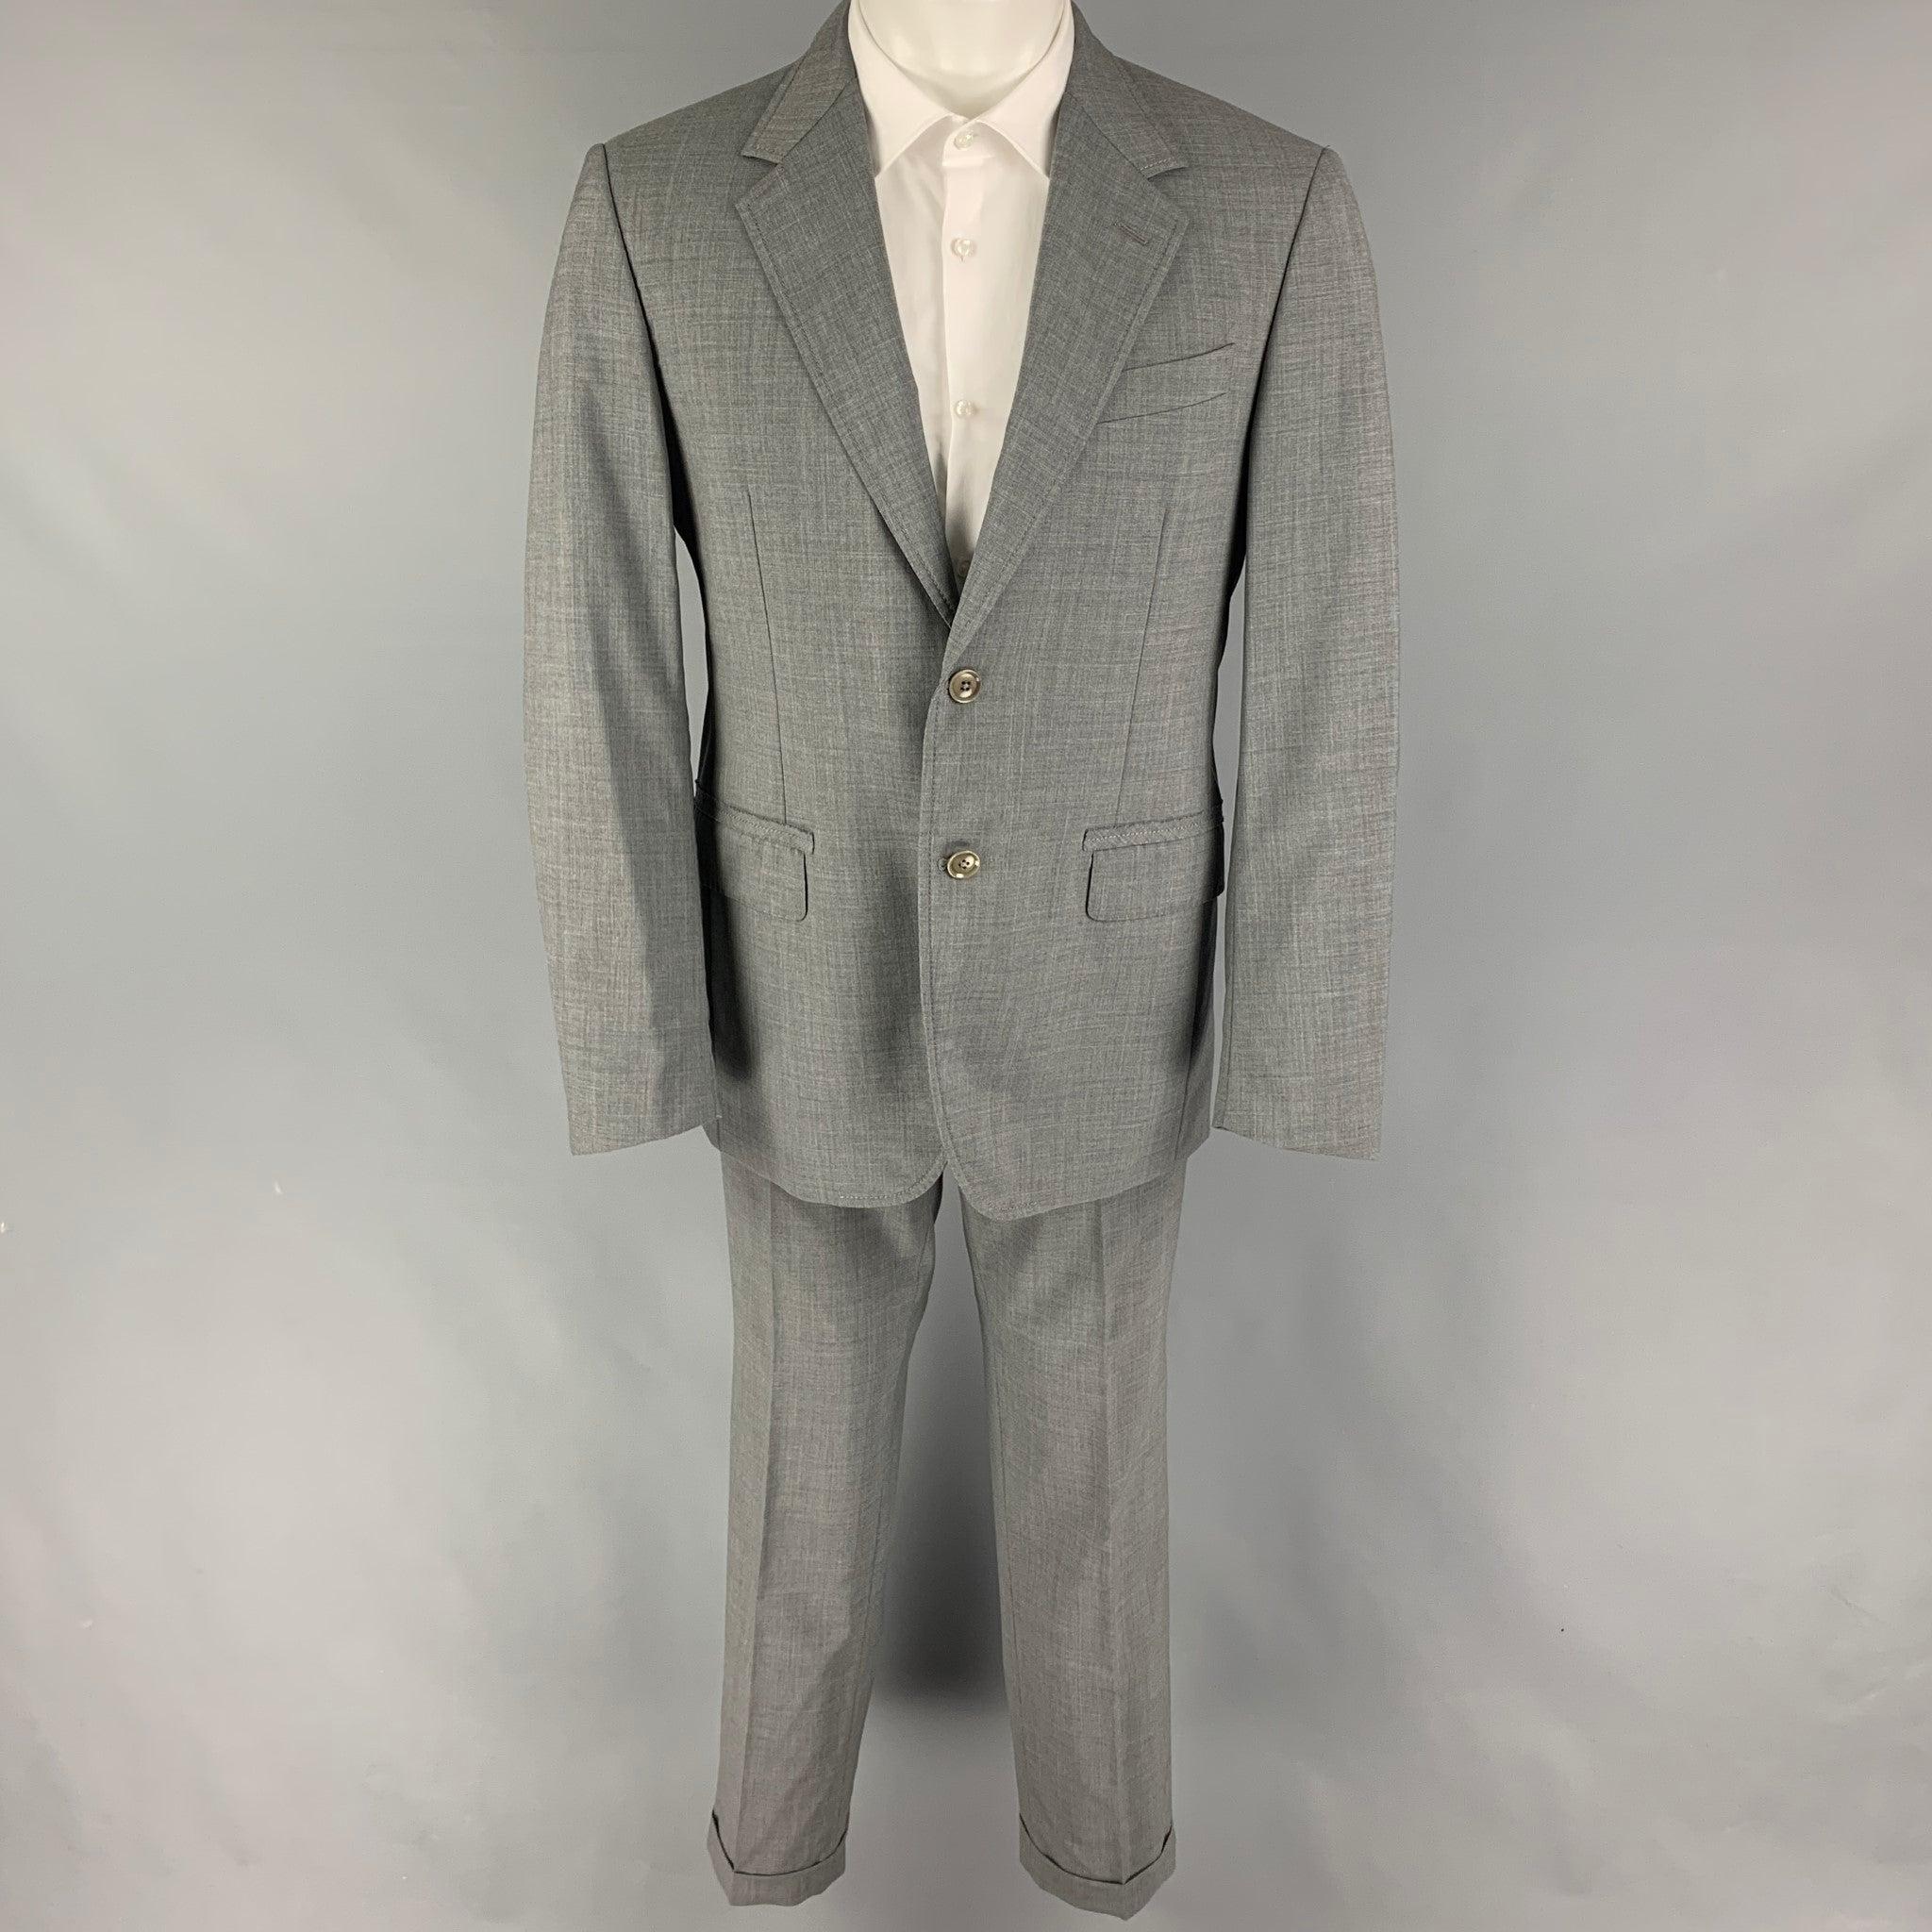 LANVIN
 suit comes in a gray wool with a full liner and includes a single breasted, double button sport coat with a notch lapel and matching flat front trousers. Made in Italy.Very Good Pre-Owned Condition. 
 

 Marked:  50 
 

 Measurements: 
 